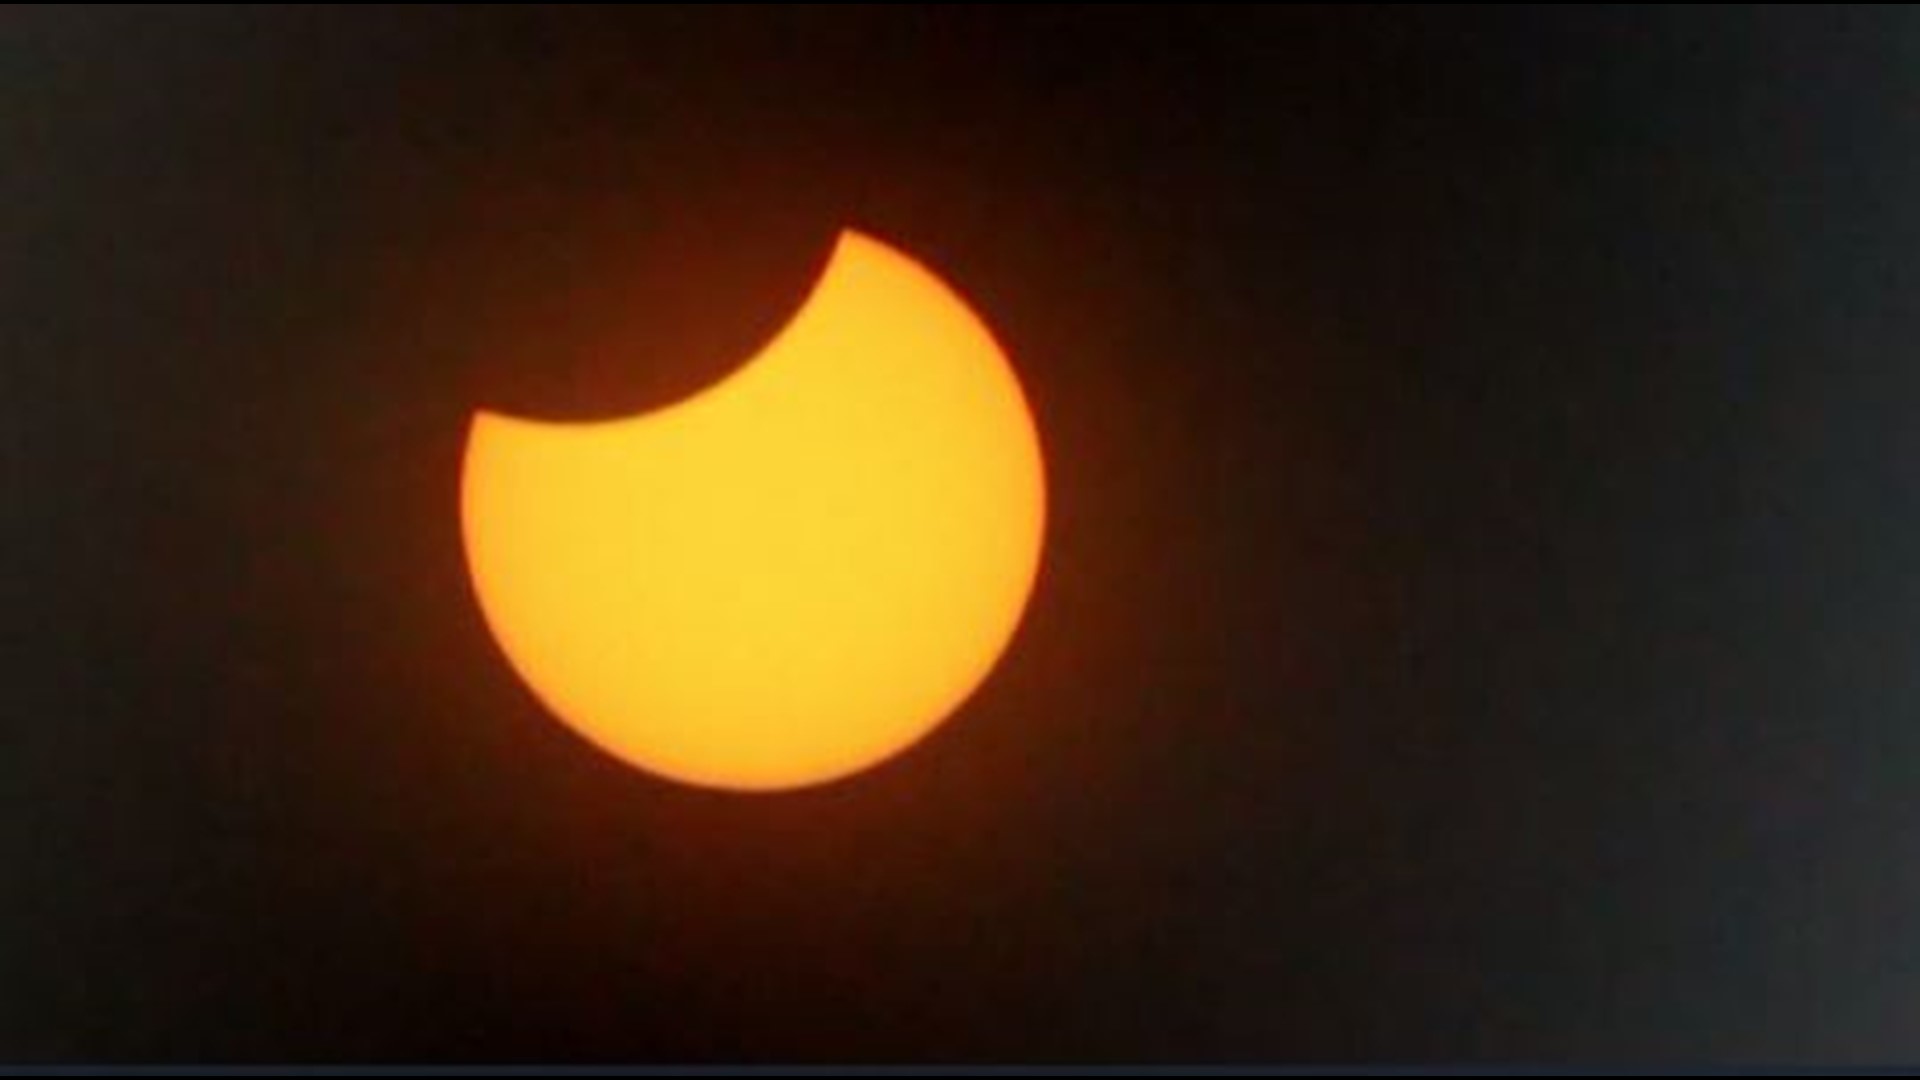 Eclipse alert - don't put your job at risk to see it | 11alive.com